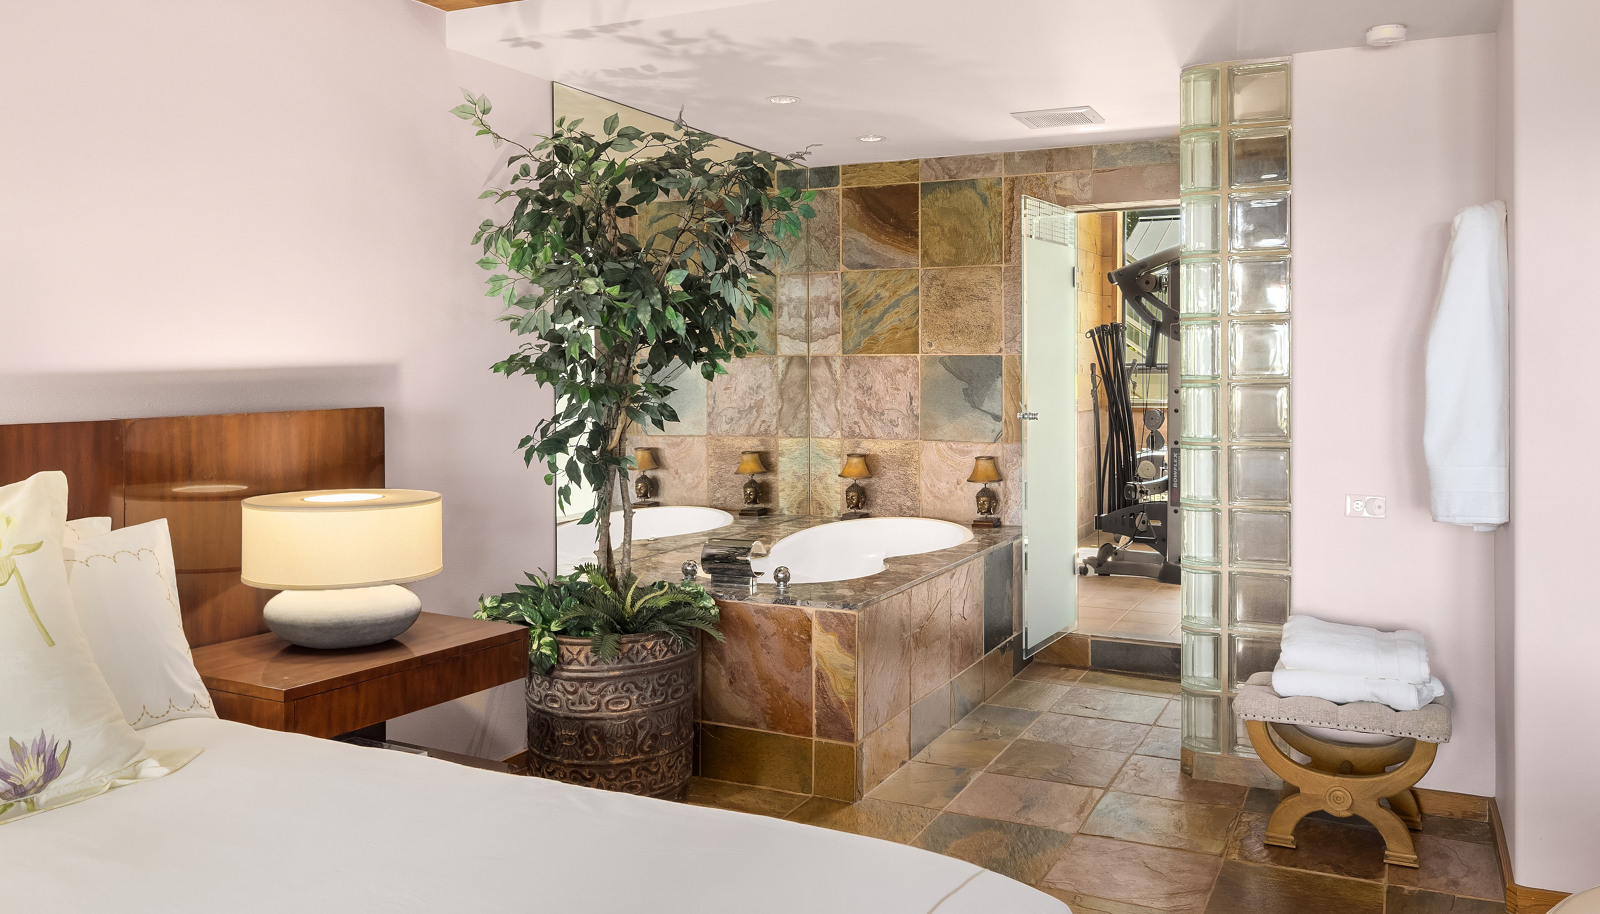 Primary bedroom #1 spa like bathroom with soaking tub, walk-in-shower, and direct access to the gym and massage room.